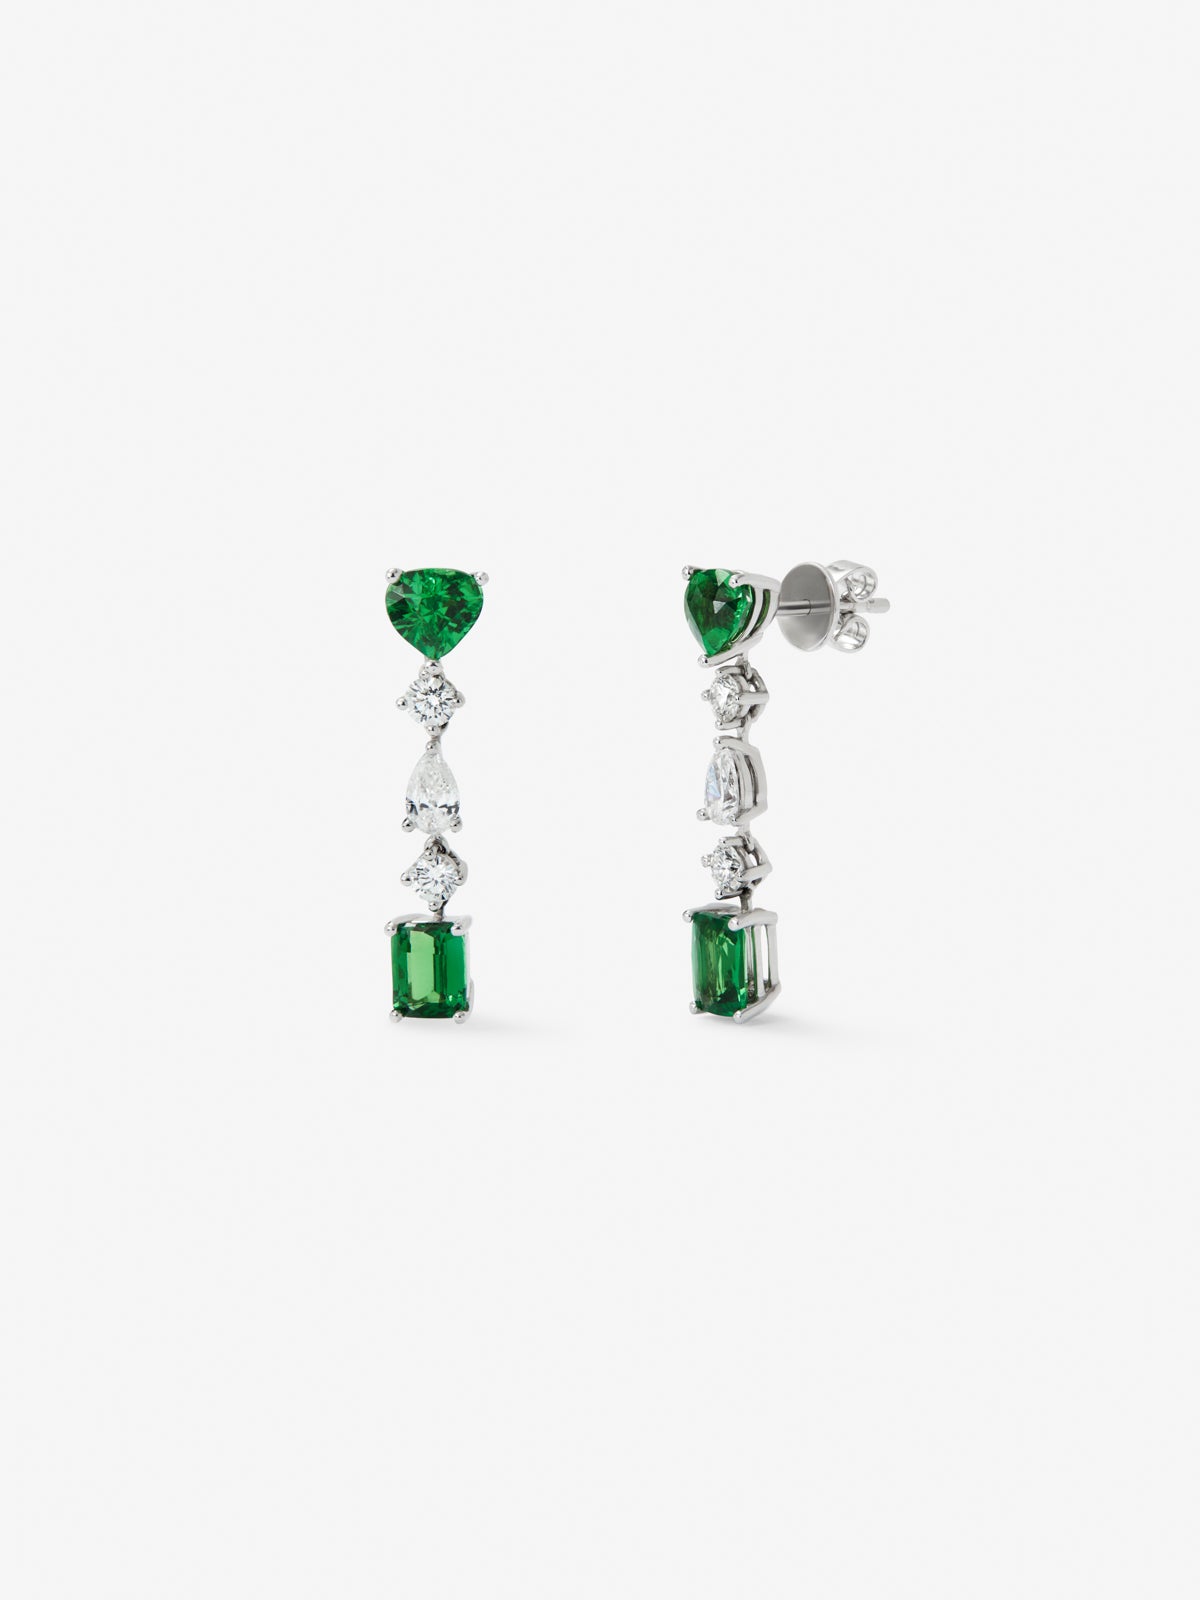 18K white gold earrings with 4 pear-cut and emerald-cut green tsavorites with a total of 8.68 cts and 6 pear-cut and brilliant-cut diamonds with a total of 0.98